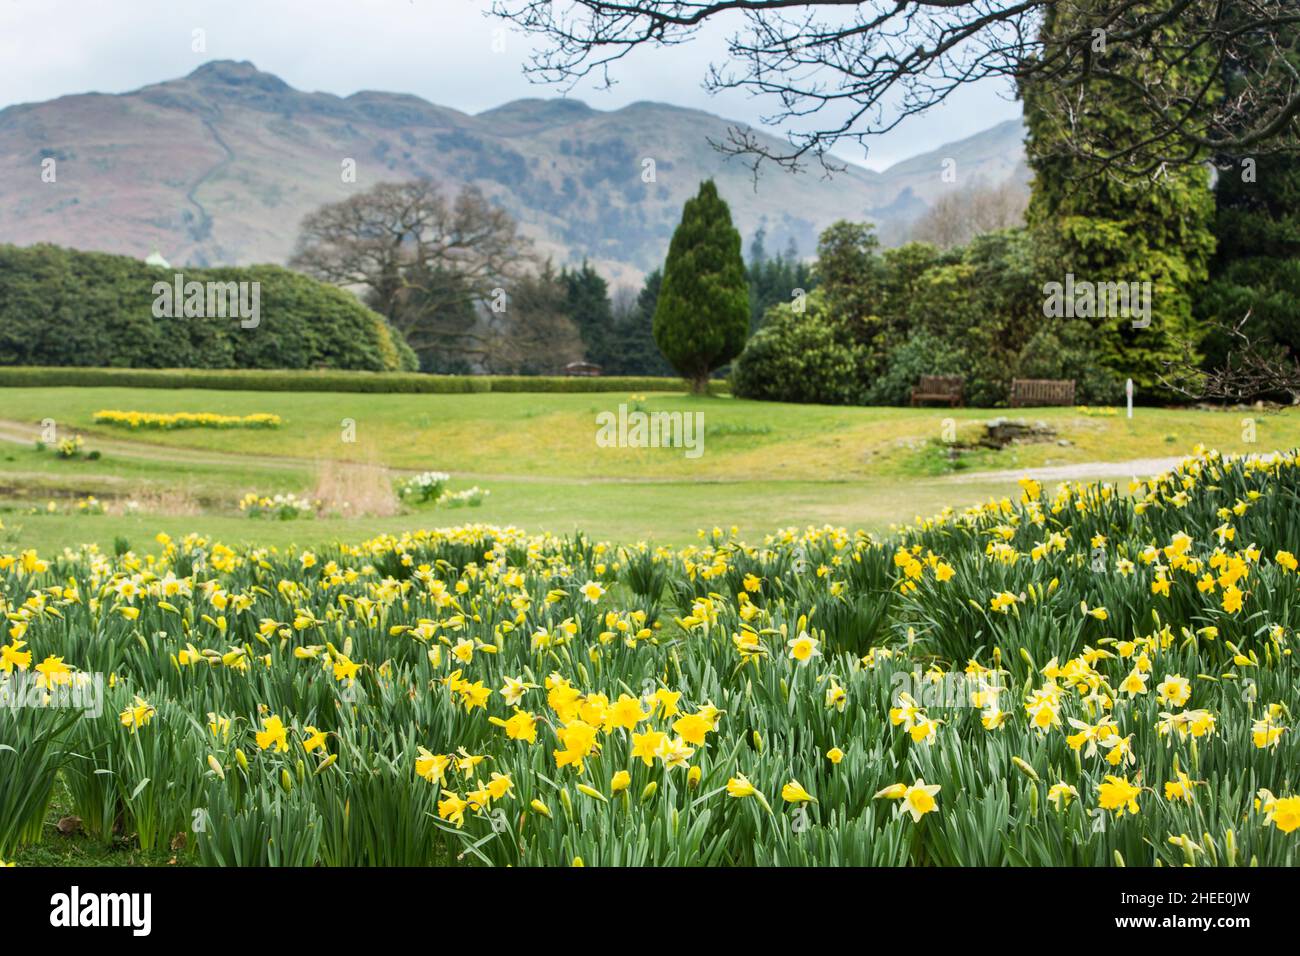 William Wordsworth host of golden daffodils beside Ullswater at Glenridding,The Lake District National Park, Cumbria, England Stock Photo